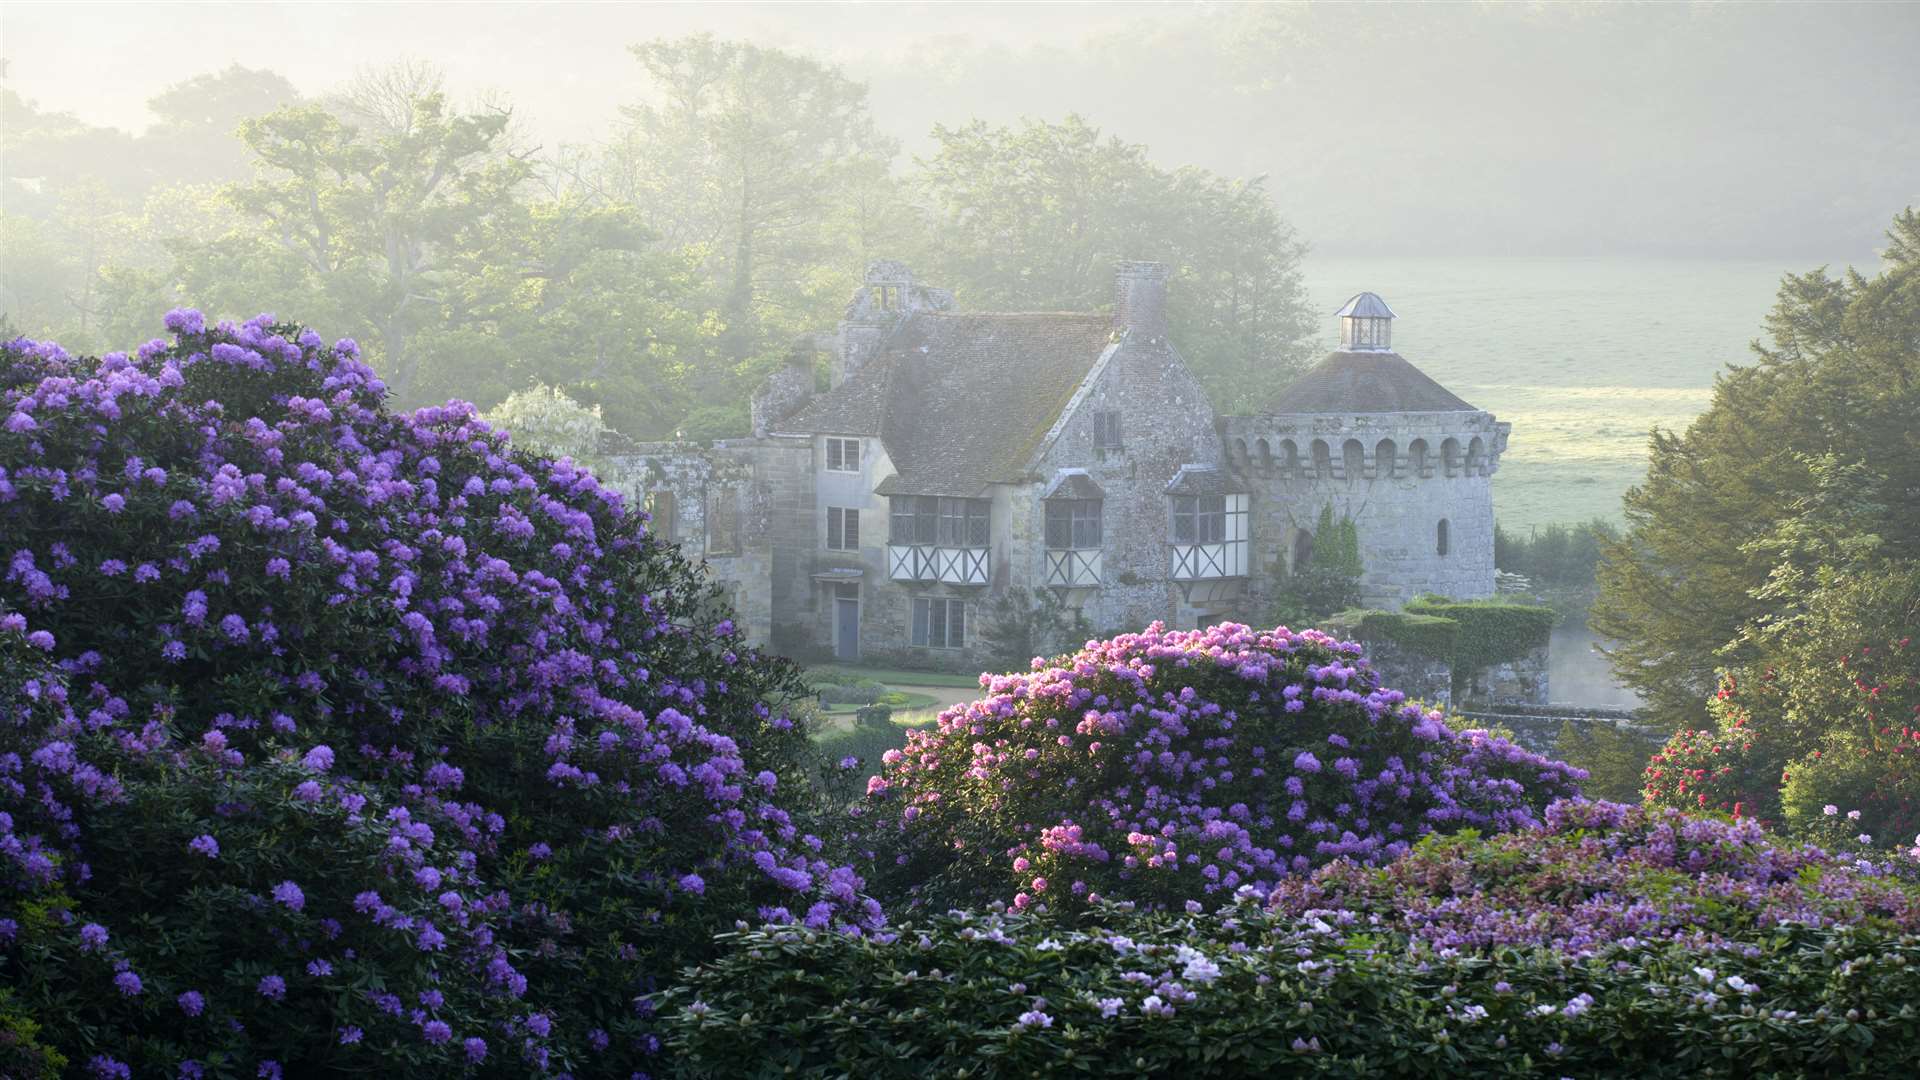 The fairytale setting of Scotney Castle Picture: NTPL/John Miller